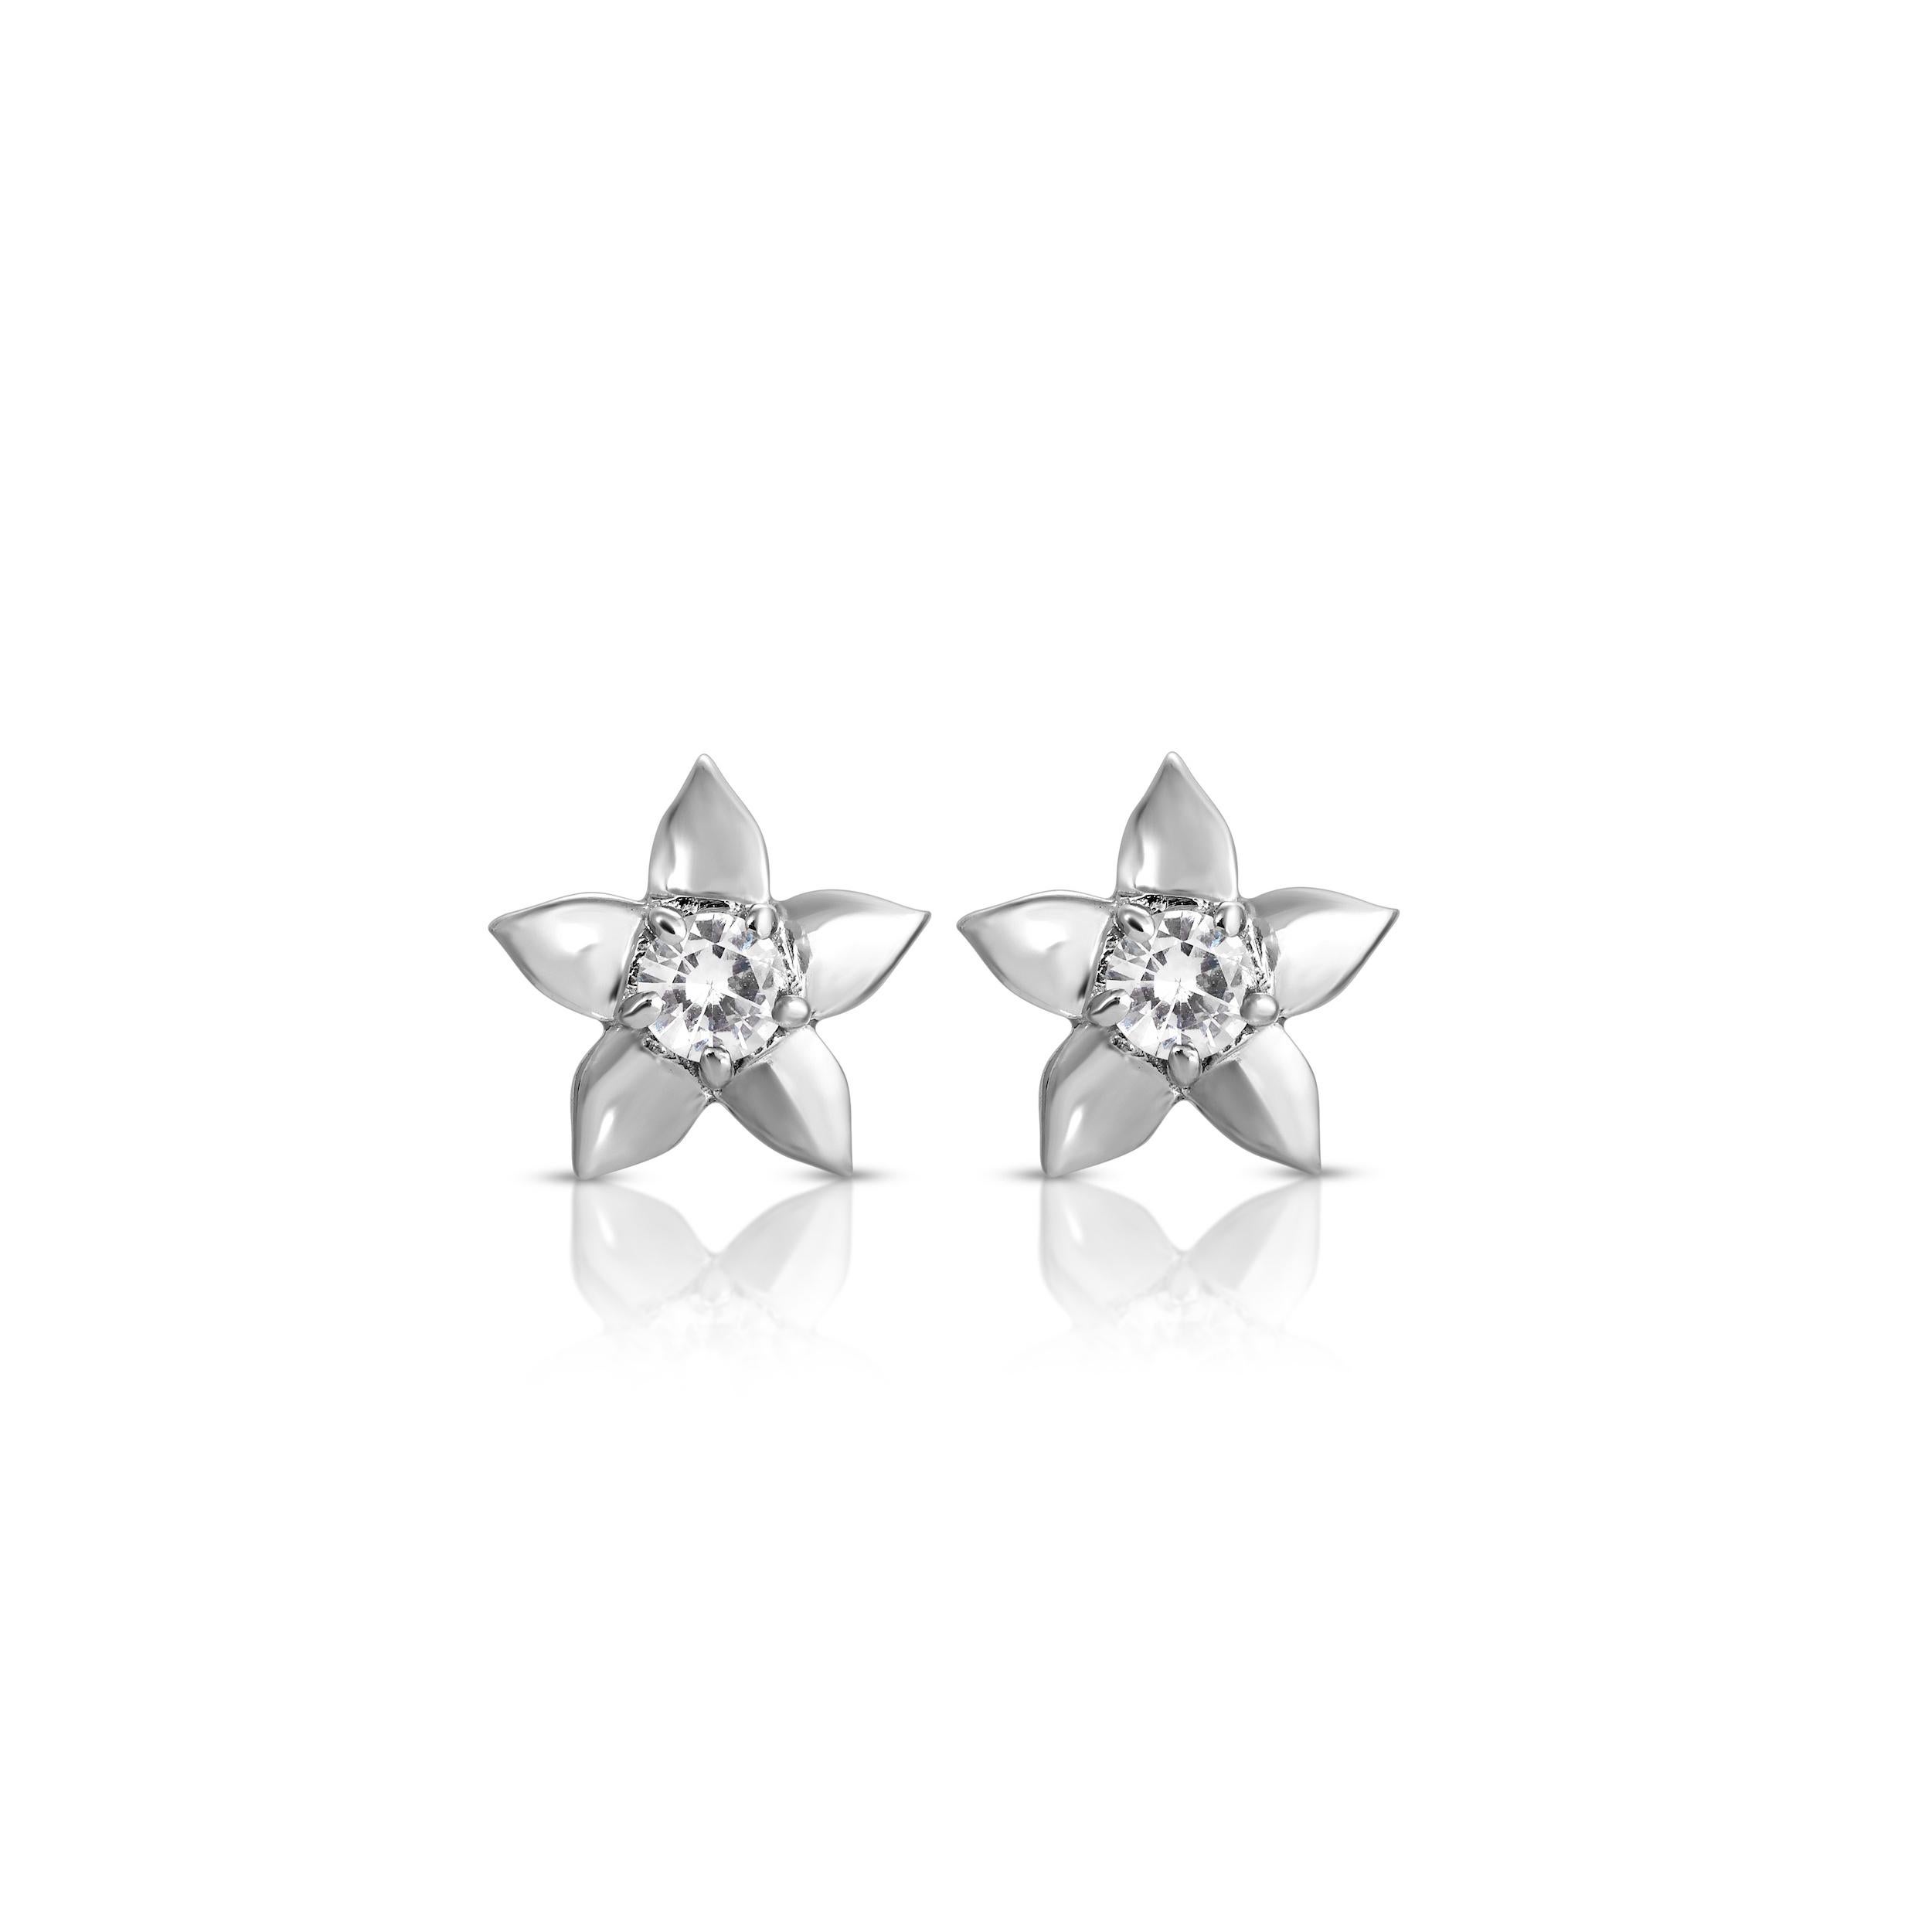 Gorgeous stud earrings in a modern star design. These earrings feature .80 Carats of sparkling white Sapphires set on stud earrings with stem and butterfly closures. These earrings are set in Silver with a stylish high-polish White Gold finish.